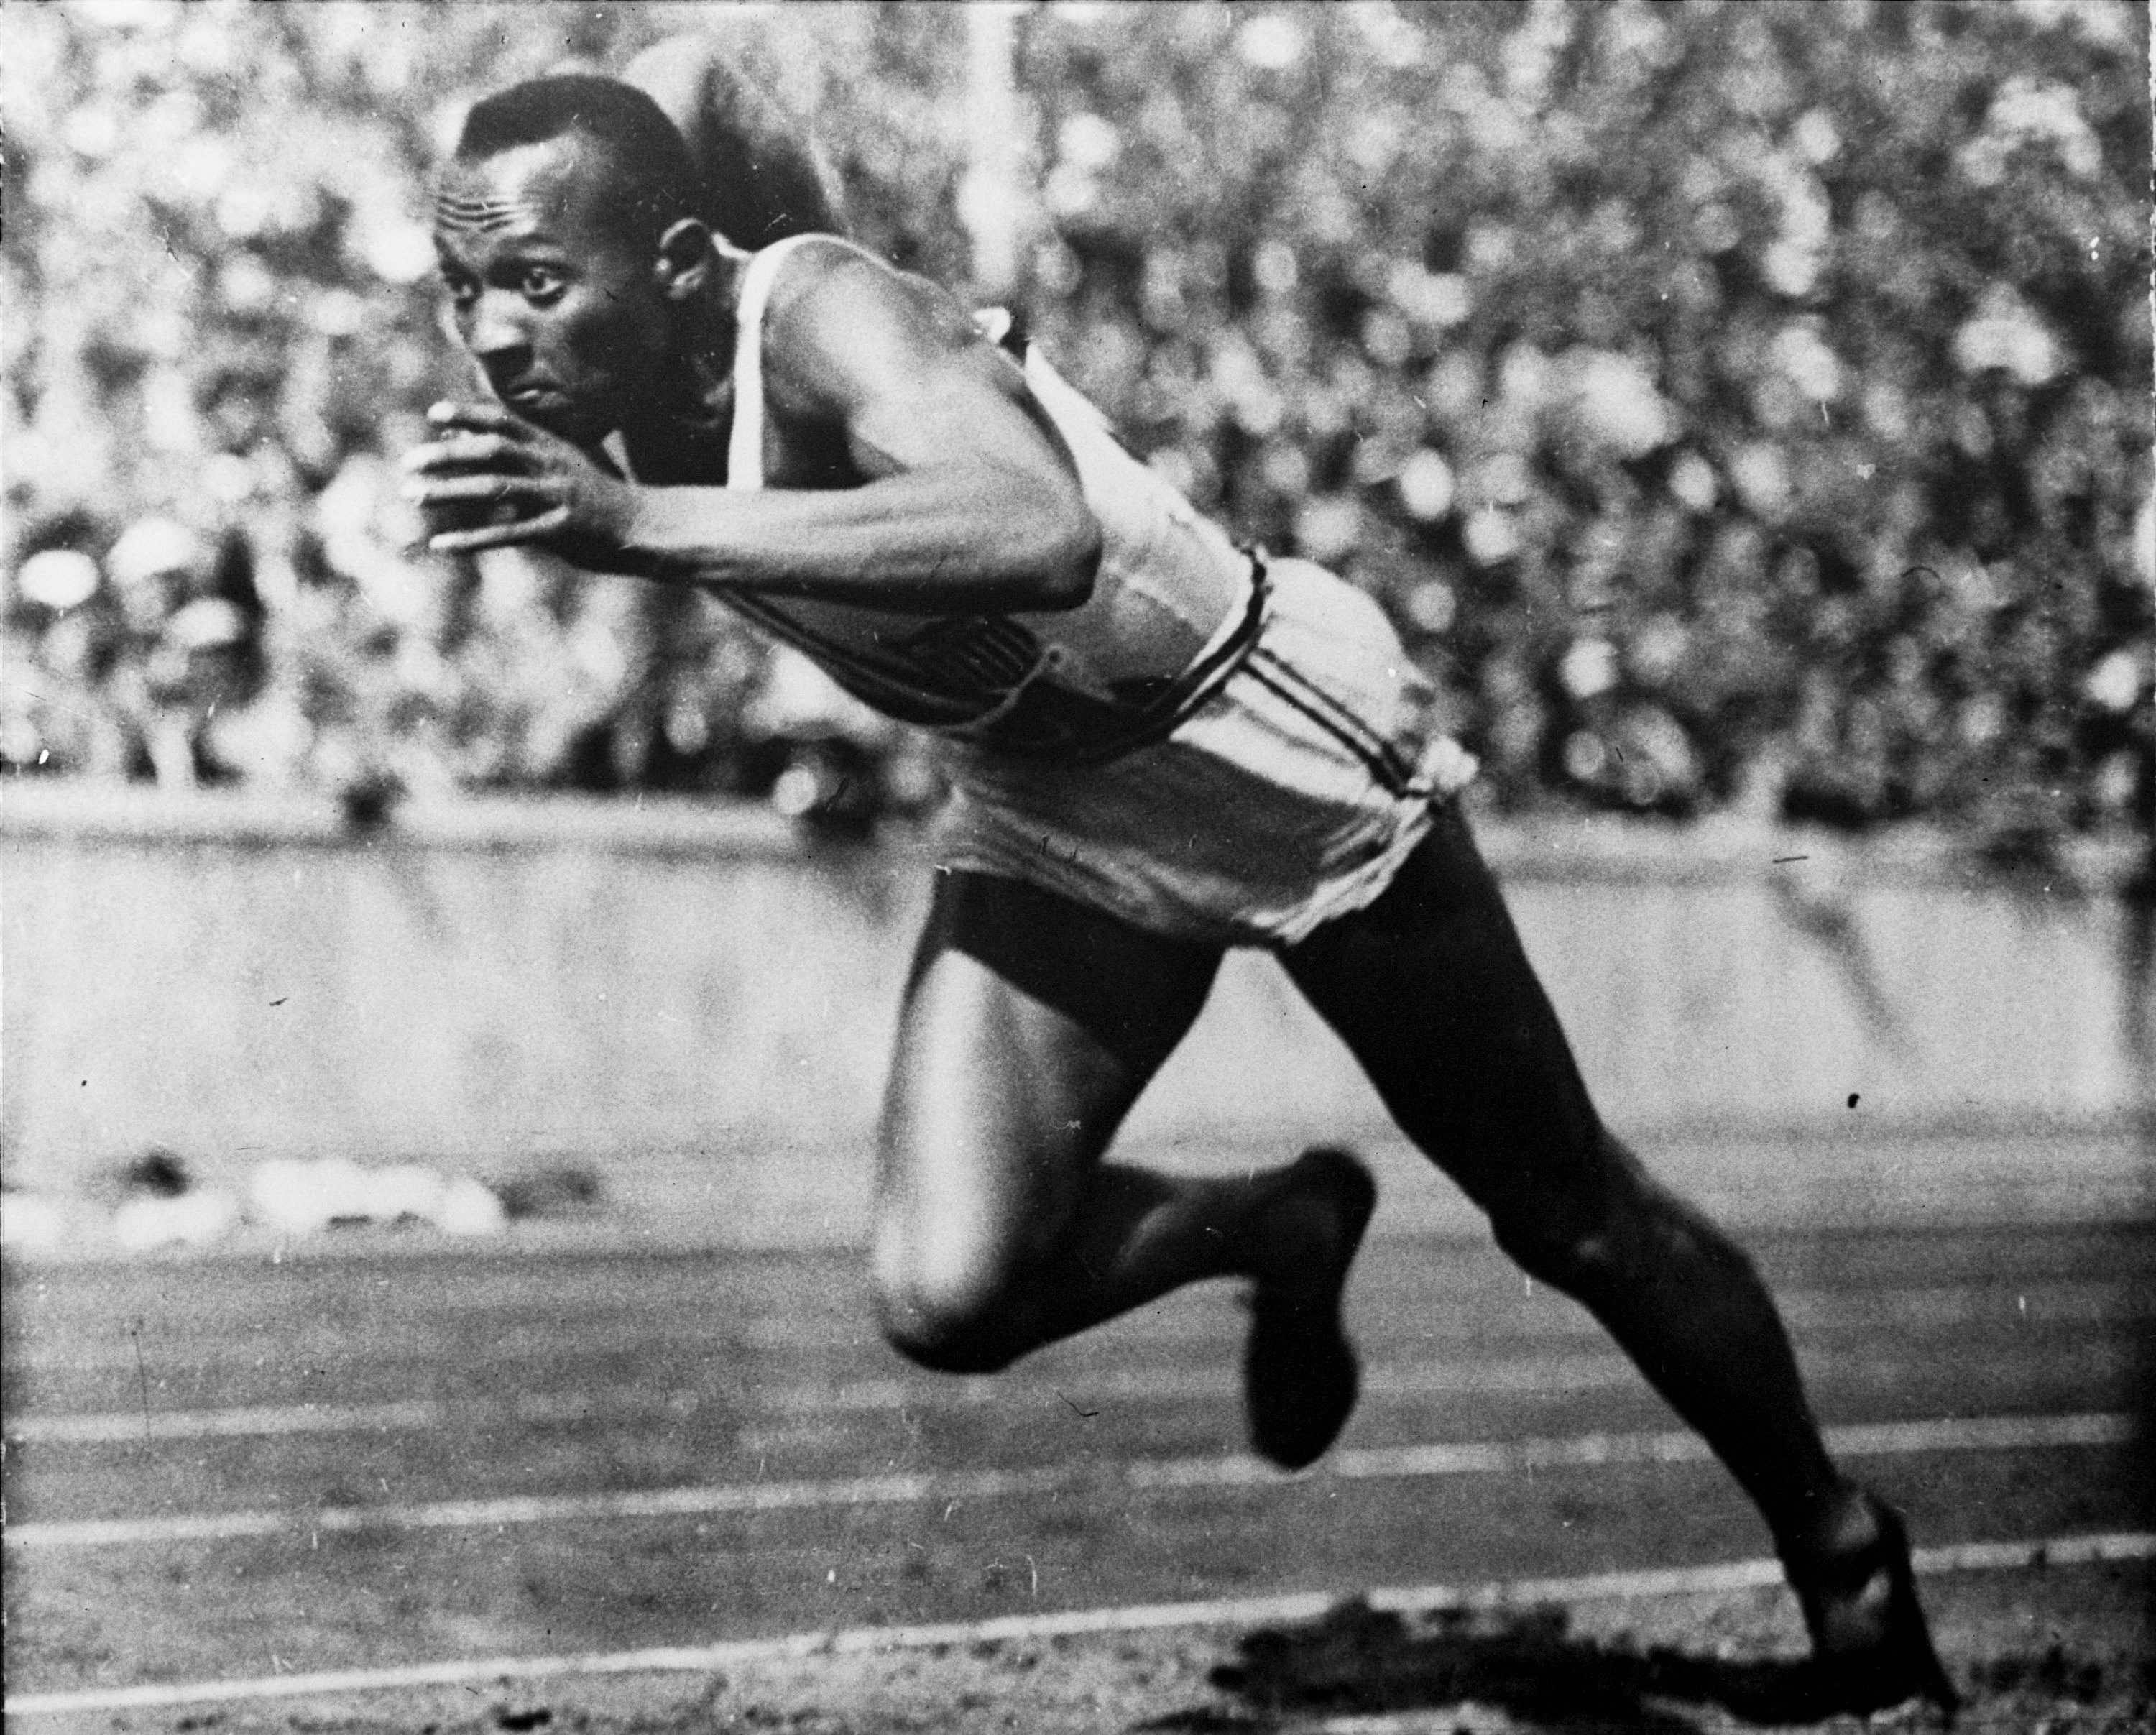 FILE - This 1936 file photo shows Jesse Owens in action in a 200-meter preliminary heat at the 1936 Summer Olympic Games in Berlin. Hop on the Underground at "Jesse Owens" station. After one stop change at "Carl Lewis." And then ride the Tube all the way to "Michael Phelps." That, sports fans, will get you from central London right to the Olympic Stadium. (AP Photo/File)